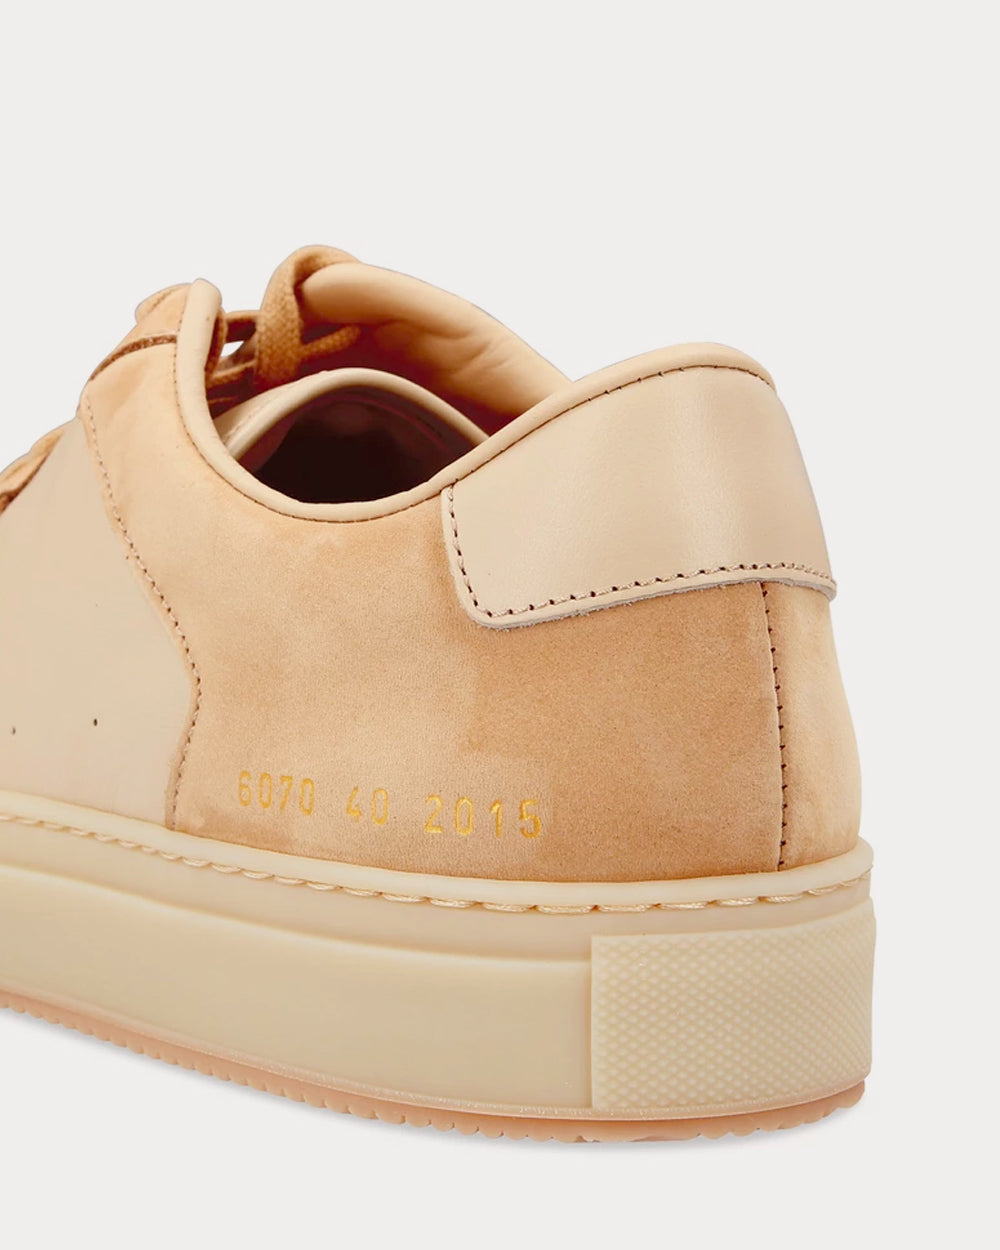 Common Projects - Bball Nude Low Top Sneakers